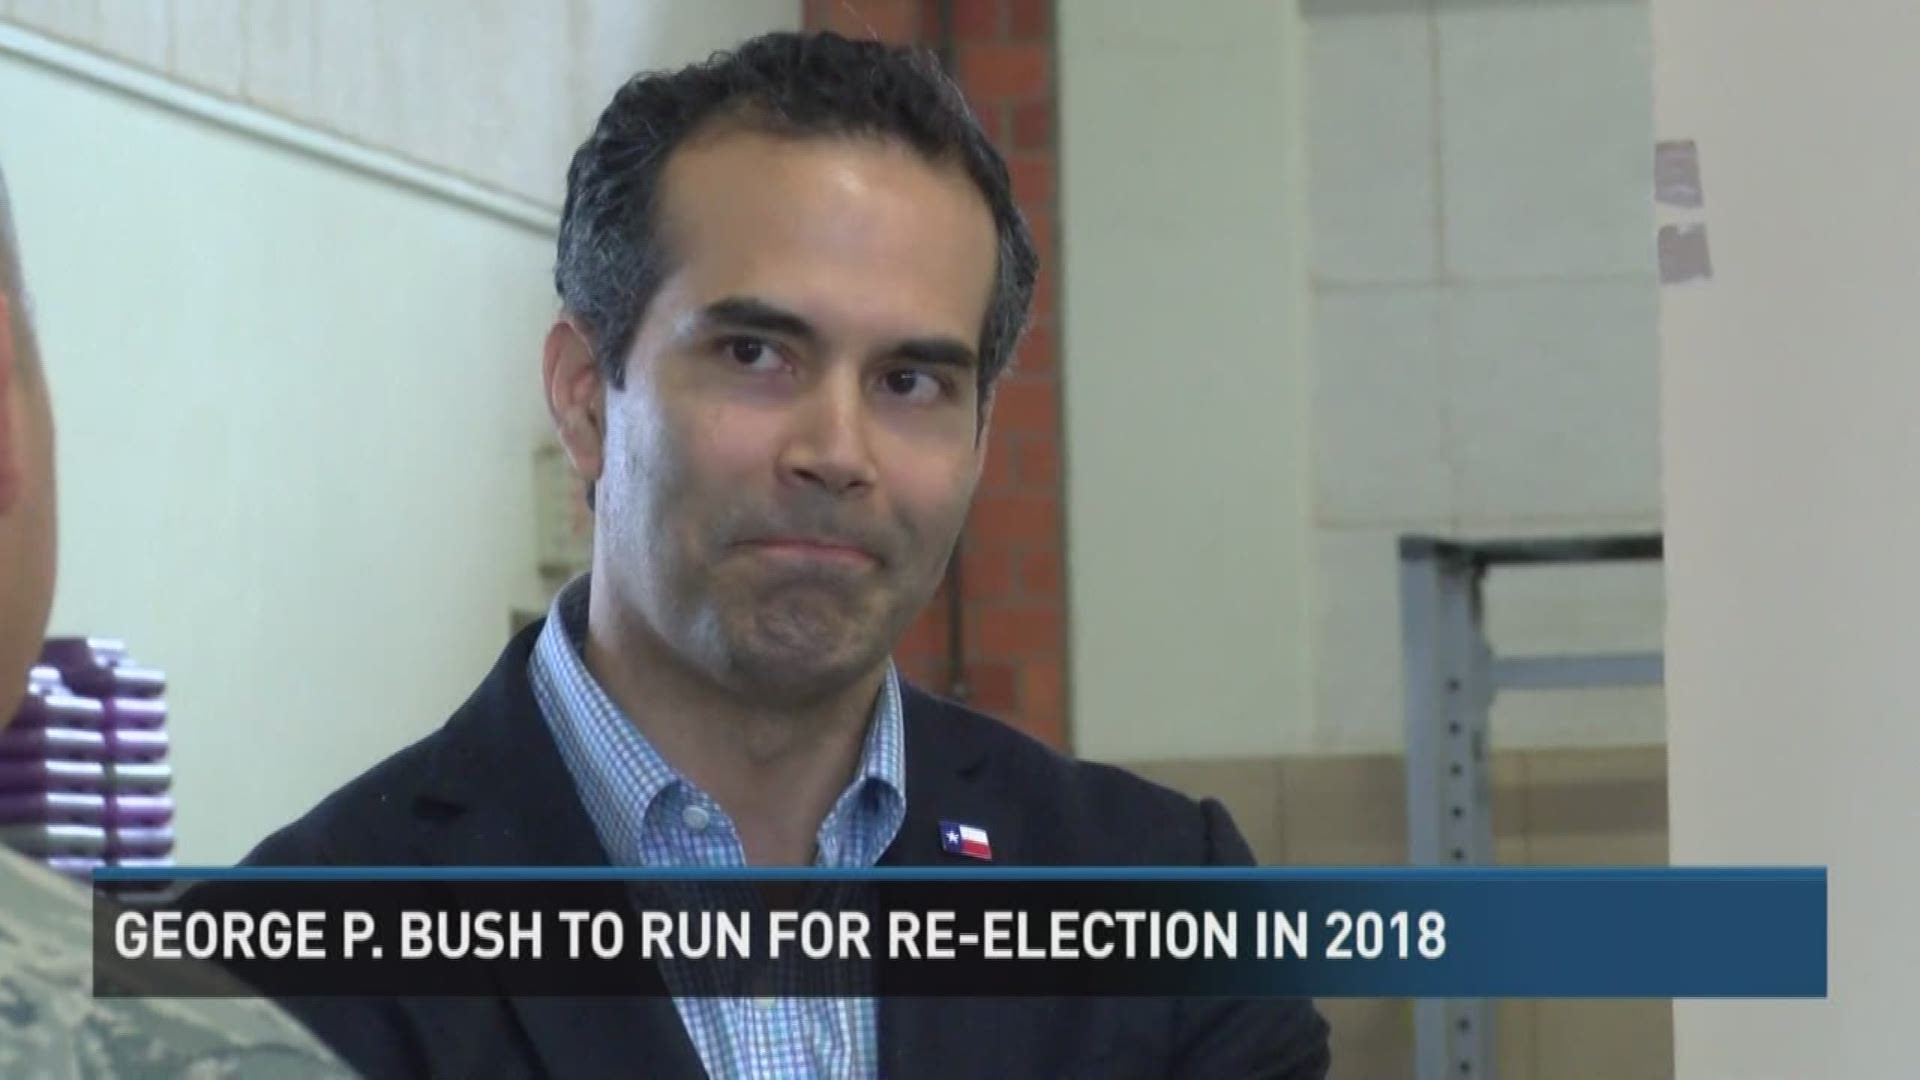 George P. Bush announced his run for re-election on Monday.